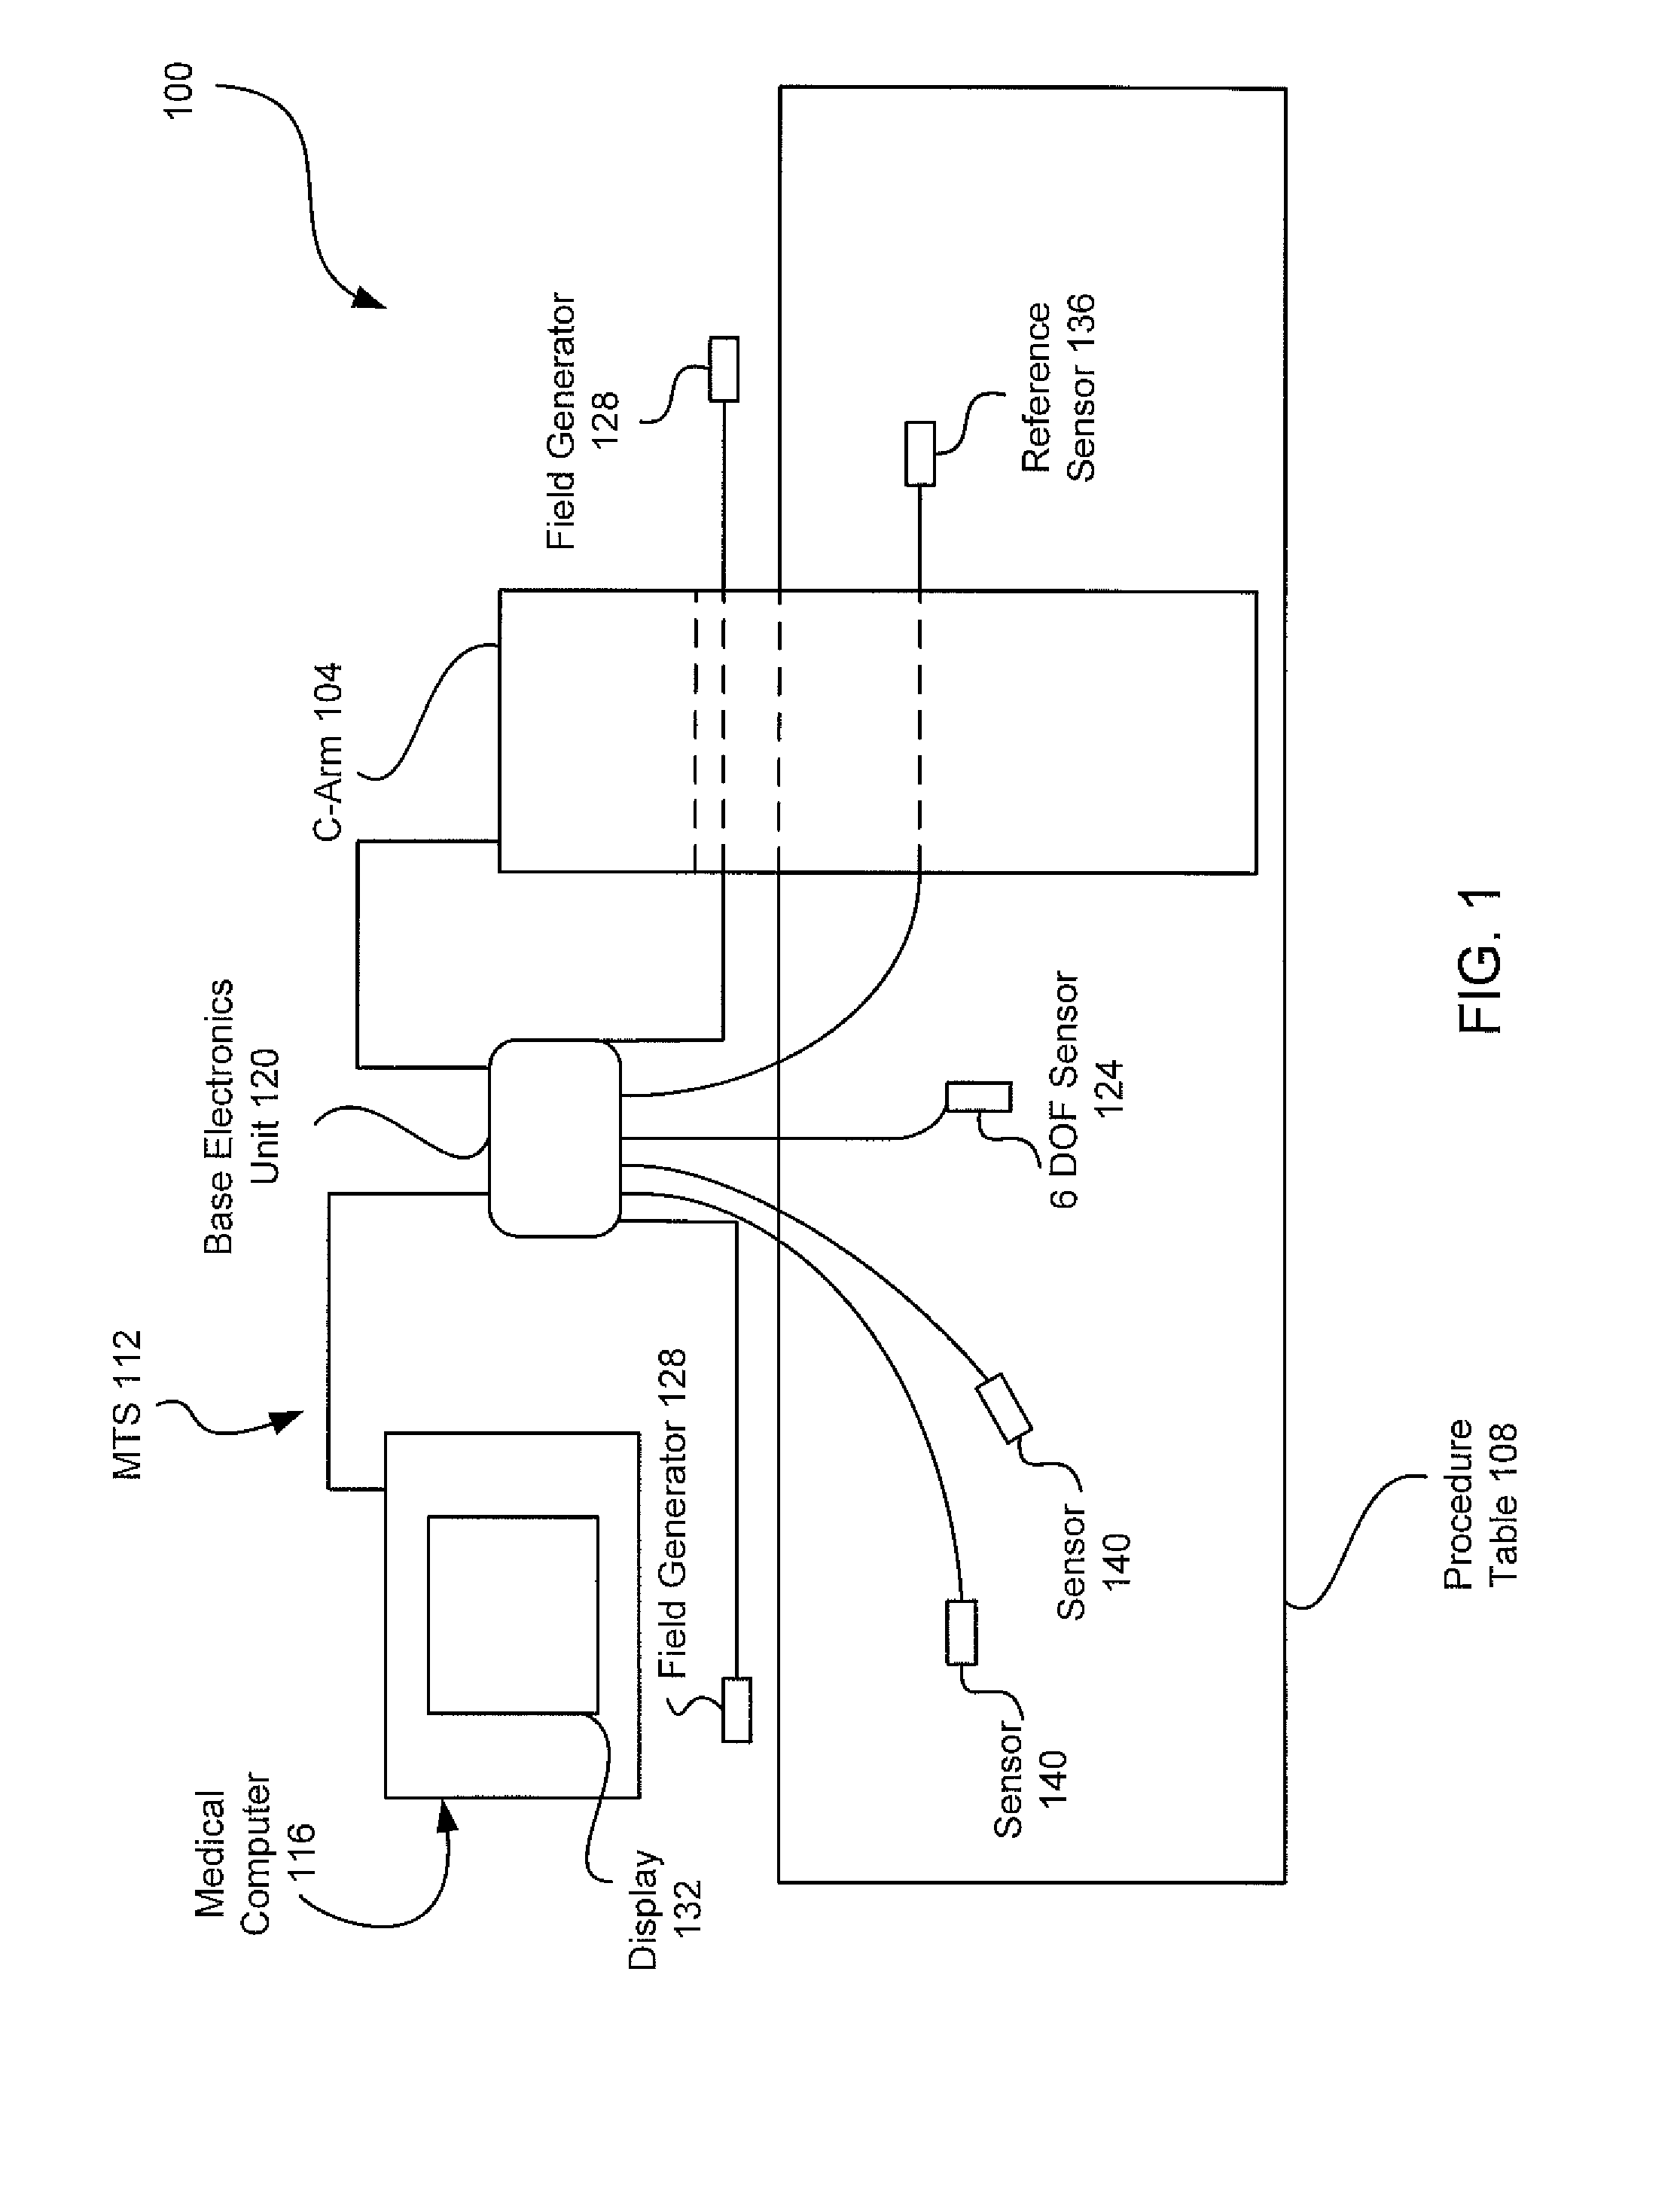 Systems and methods for compensating for large moving objects in magnetic-tracking environments